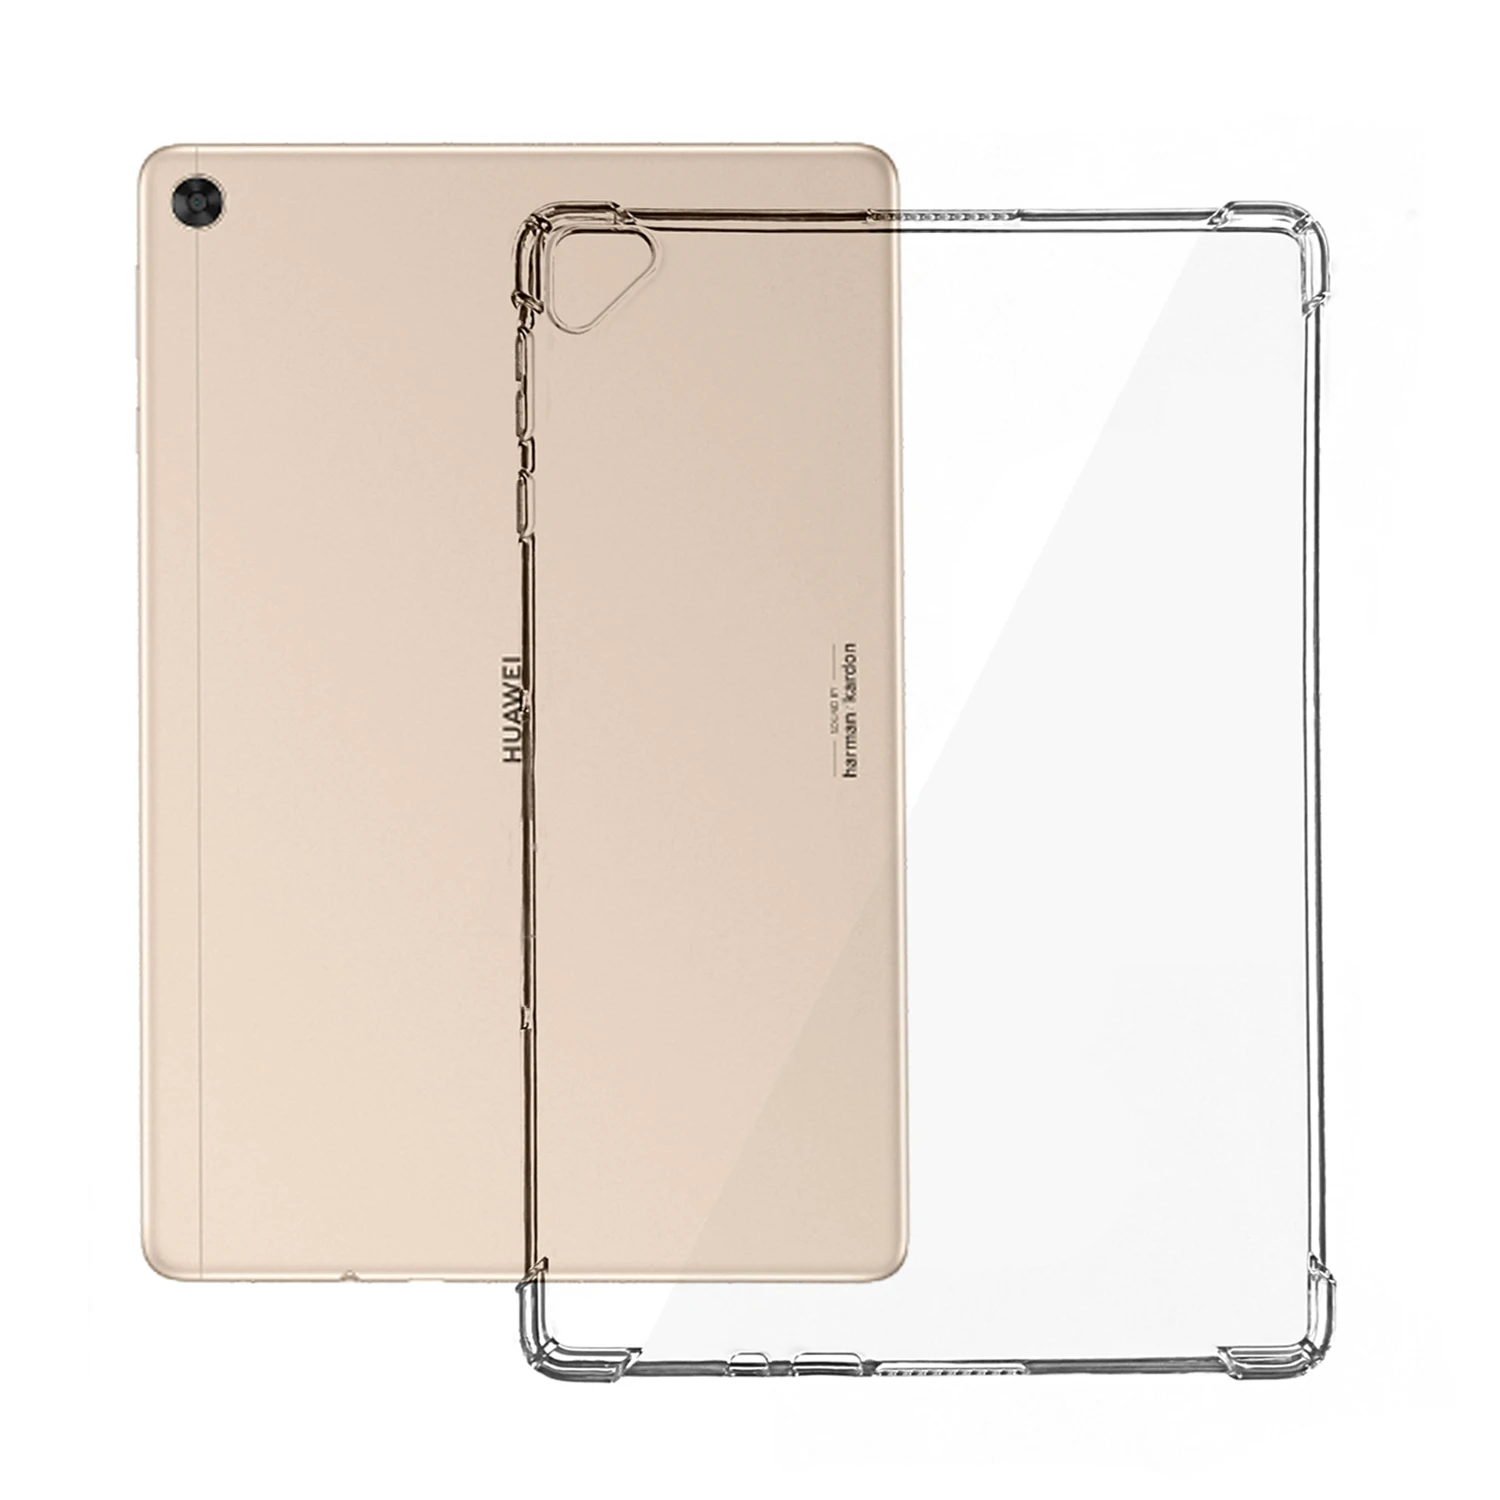 

Silicon Case For Huawei Enjoy Tablet 2 Matepad T10S AGS3-L09 AGS3-W09 T10 10.1'' Transparent Case Soft TPU Back Tablet Cover